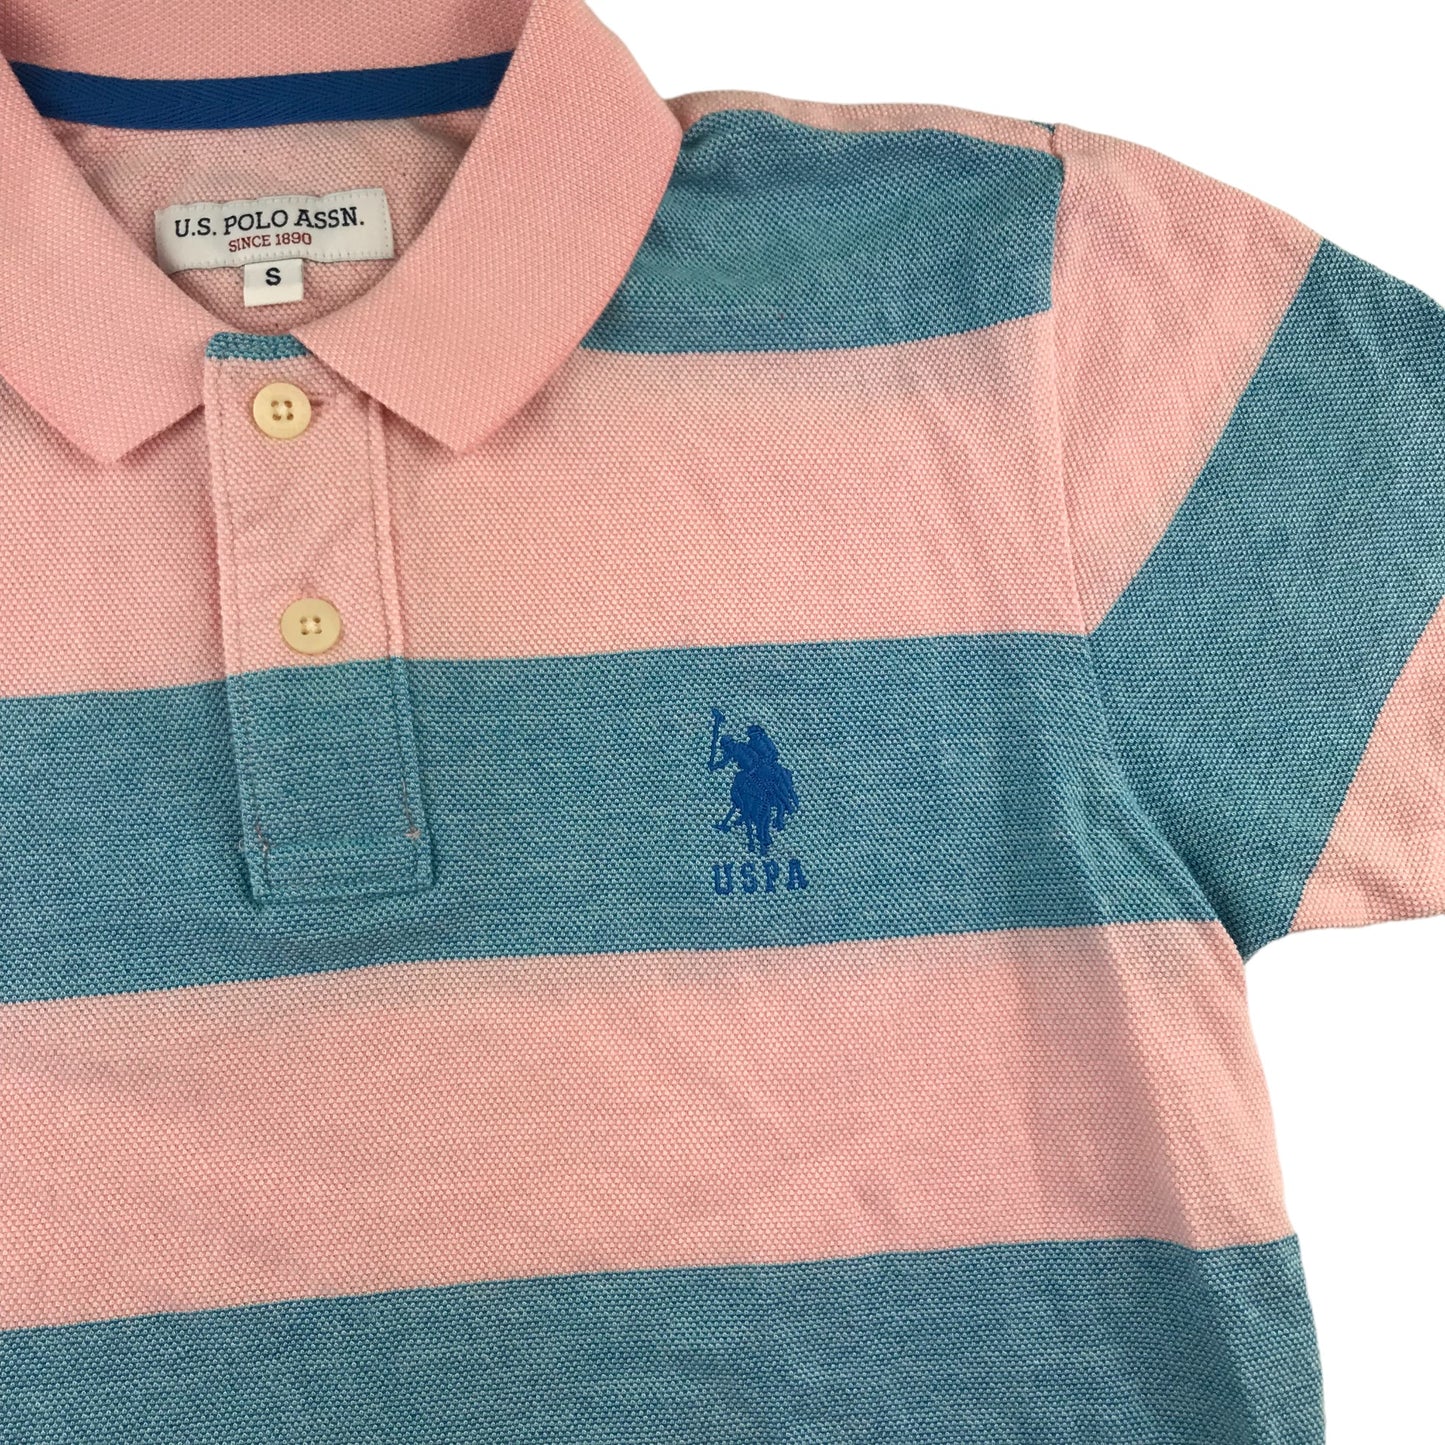 US Polo Assn Polo Shirt Size S Pink and Blue Stripy Short Sleeve Cotton